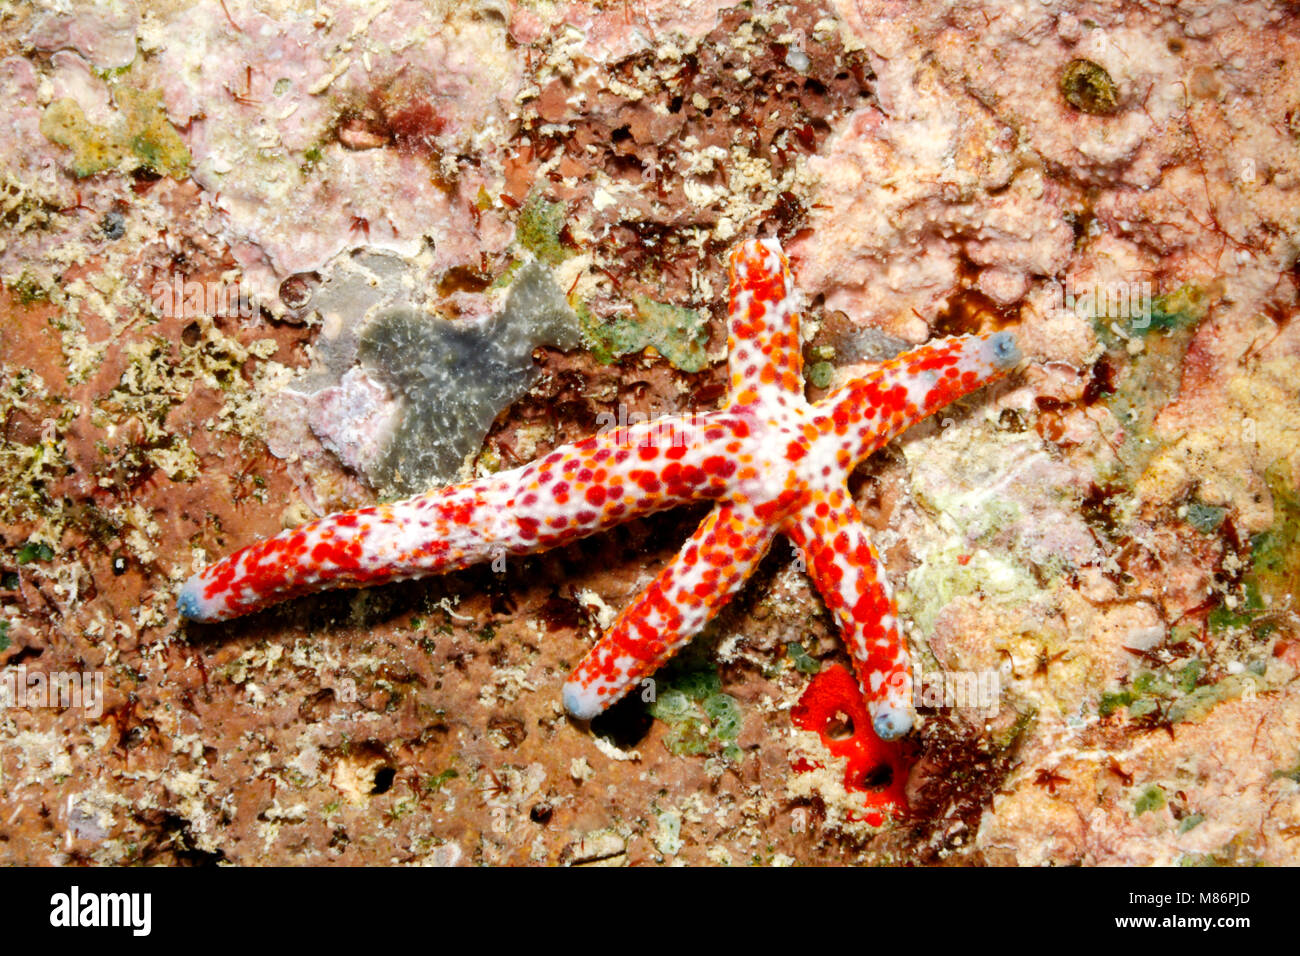 Comet Sea Star, Linckia multifora, showing a four arm regeneration growing from the stump of a 'parent' arm. Please see below for more information. Stock Photo